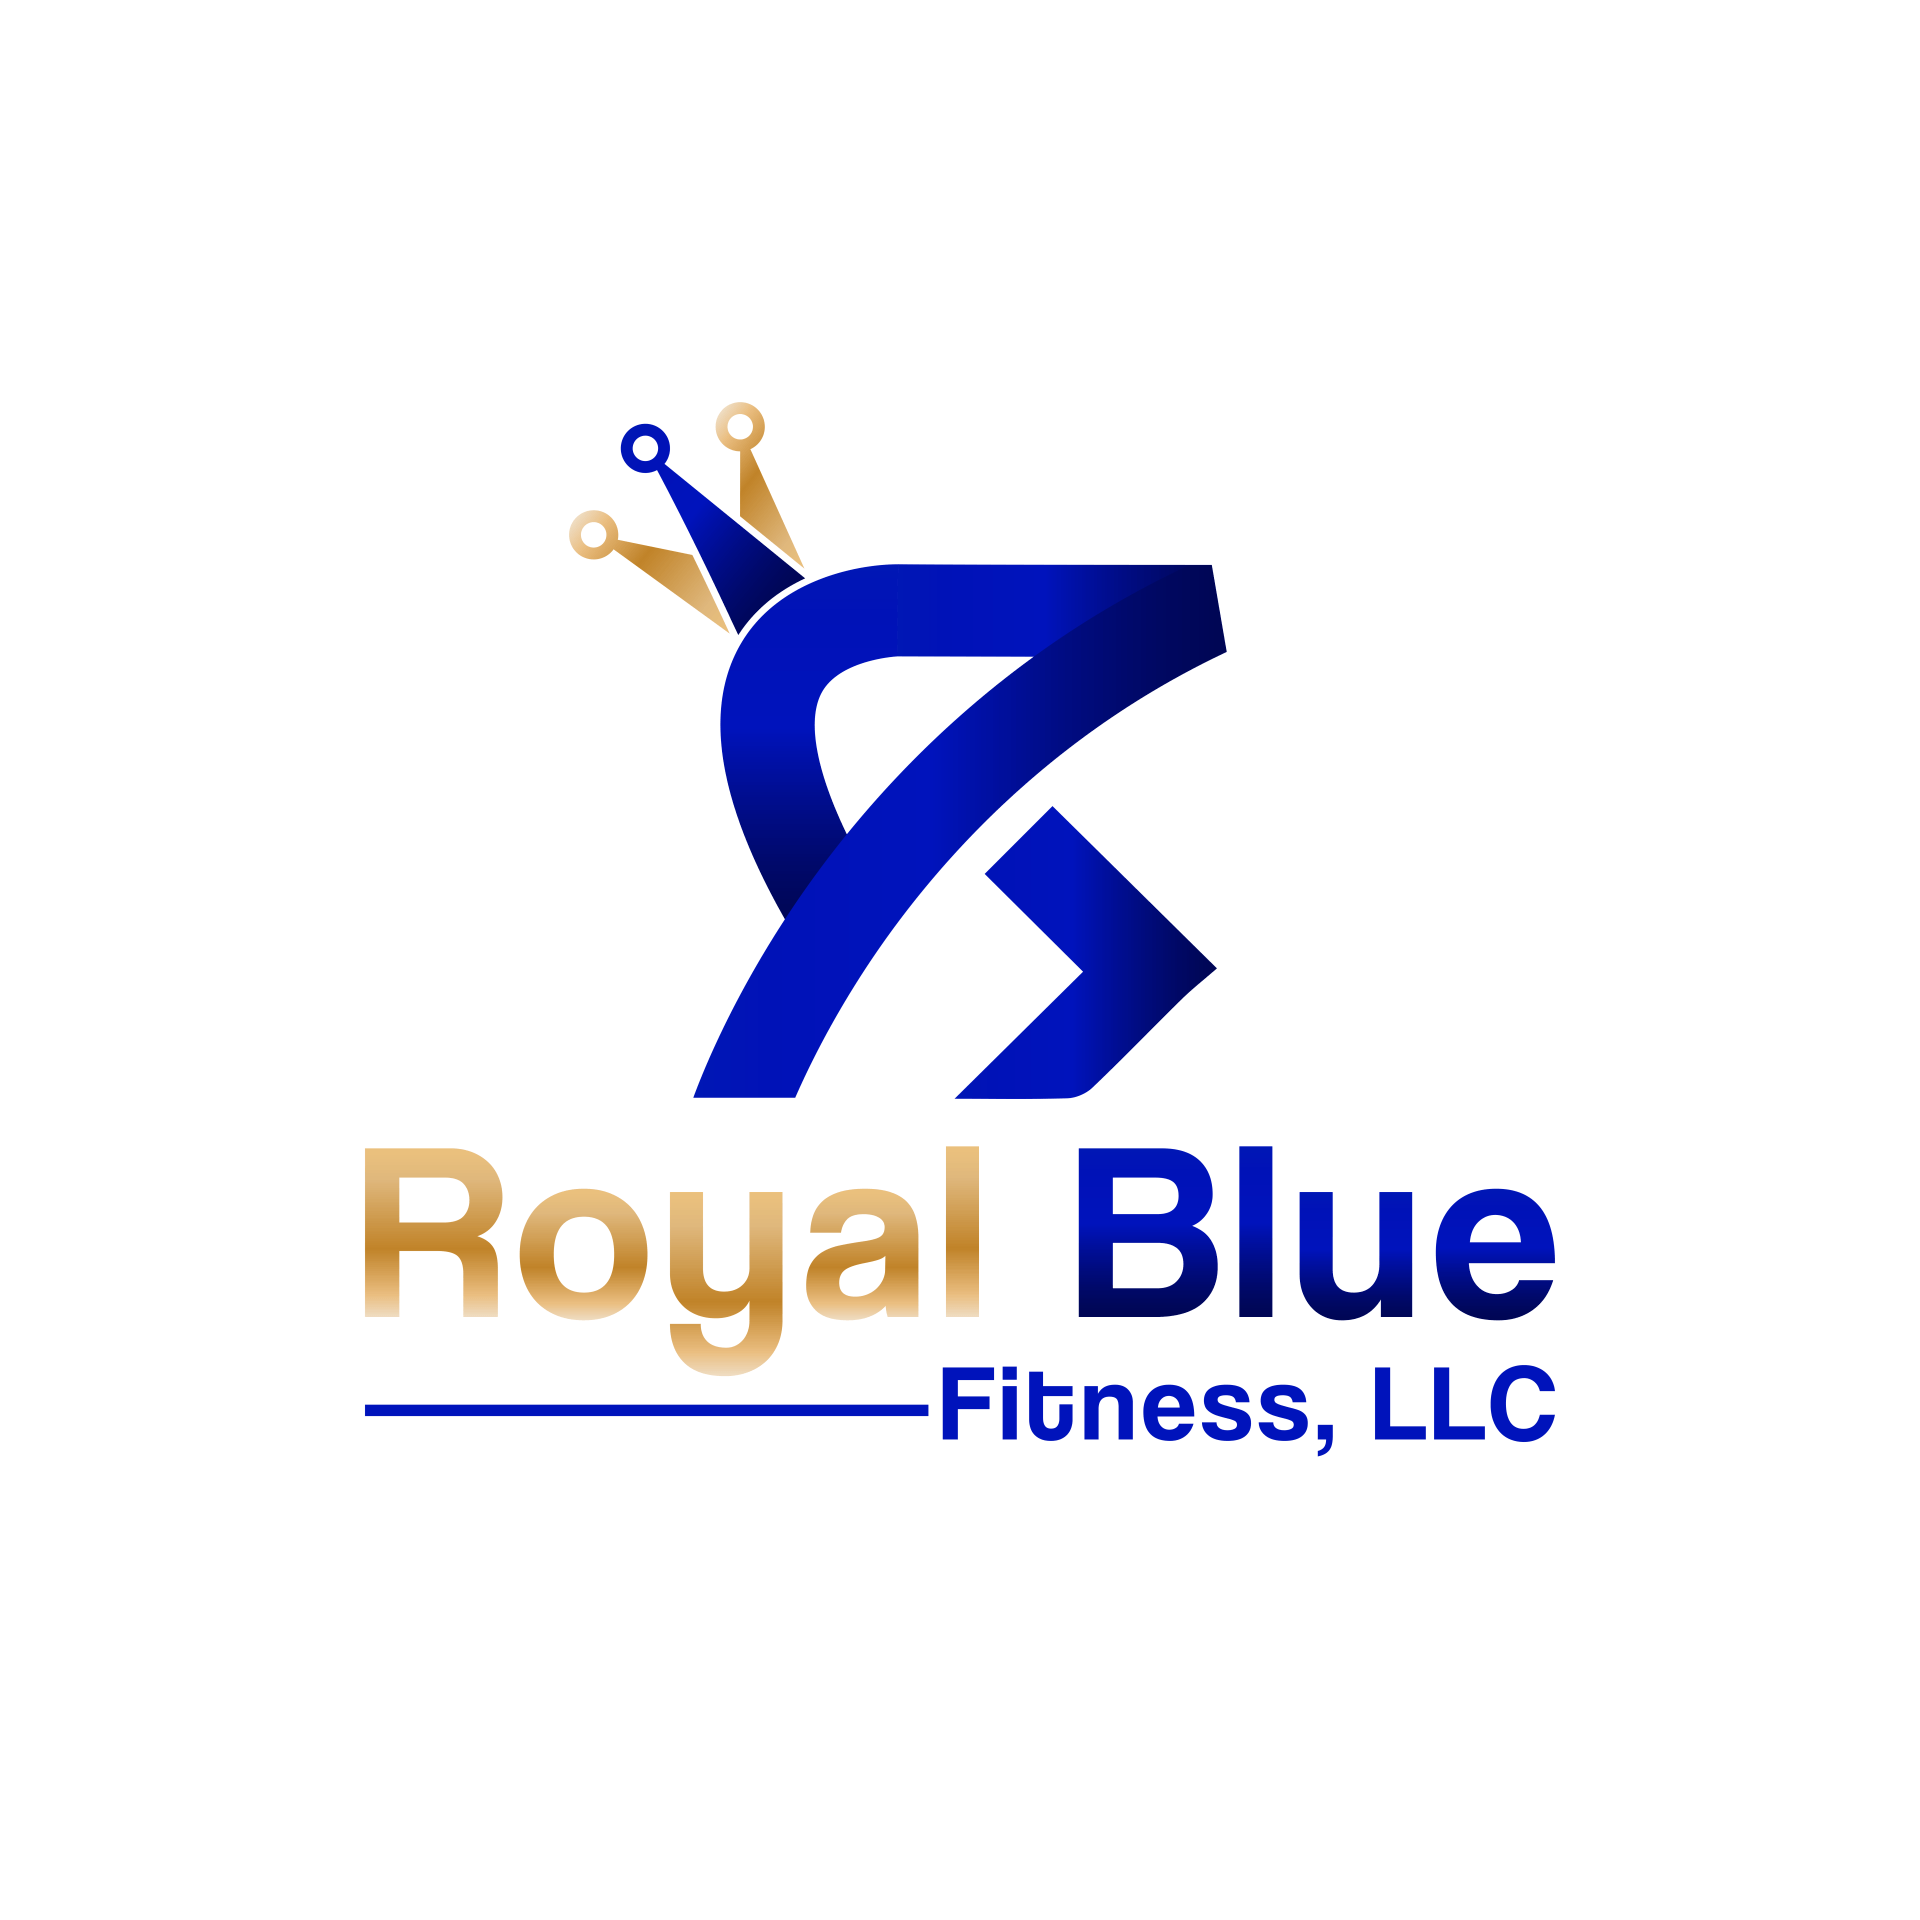 Royal Blue Fitness, LLC logo featuring the full company name in blue and gold.